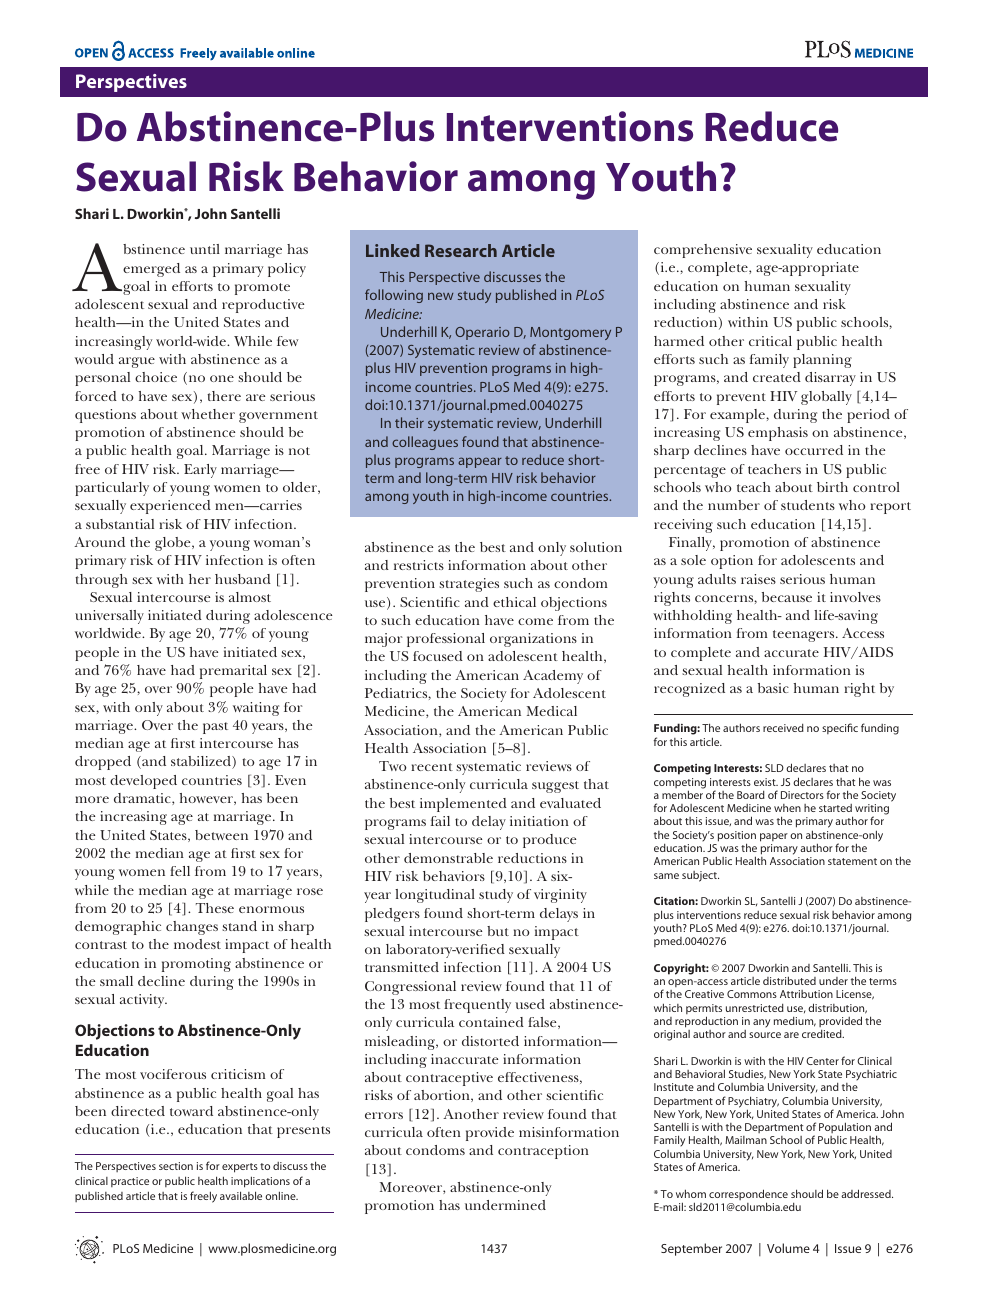 Promising Programmatic Approaches for Adolescent and Youth Sexual